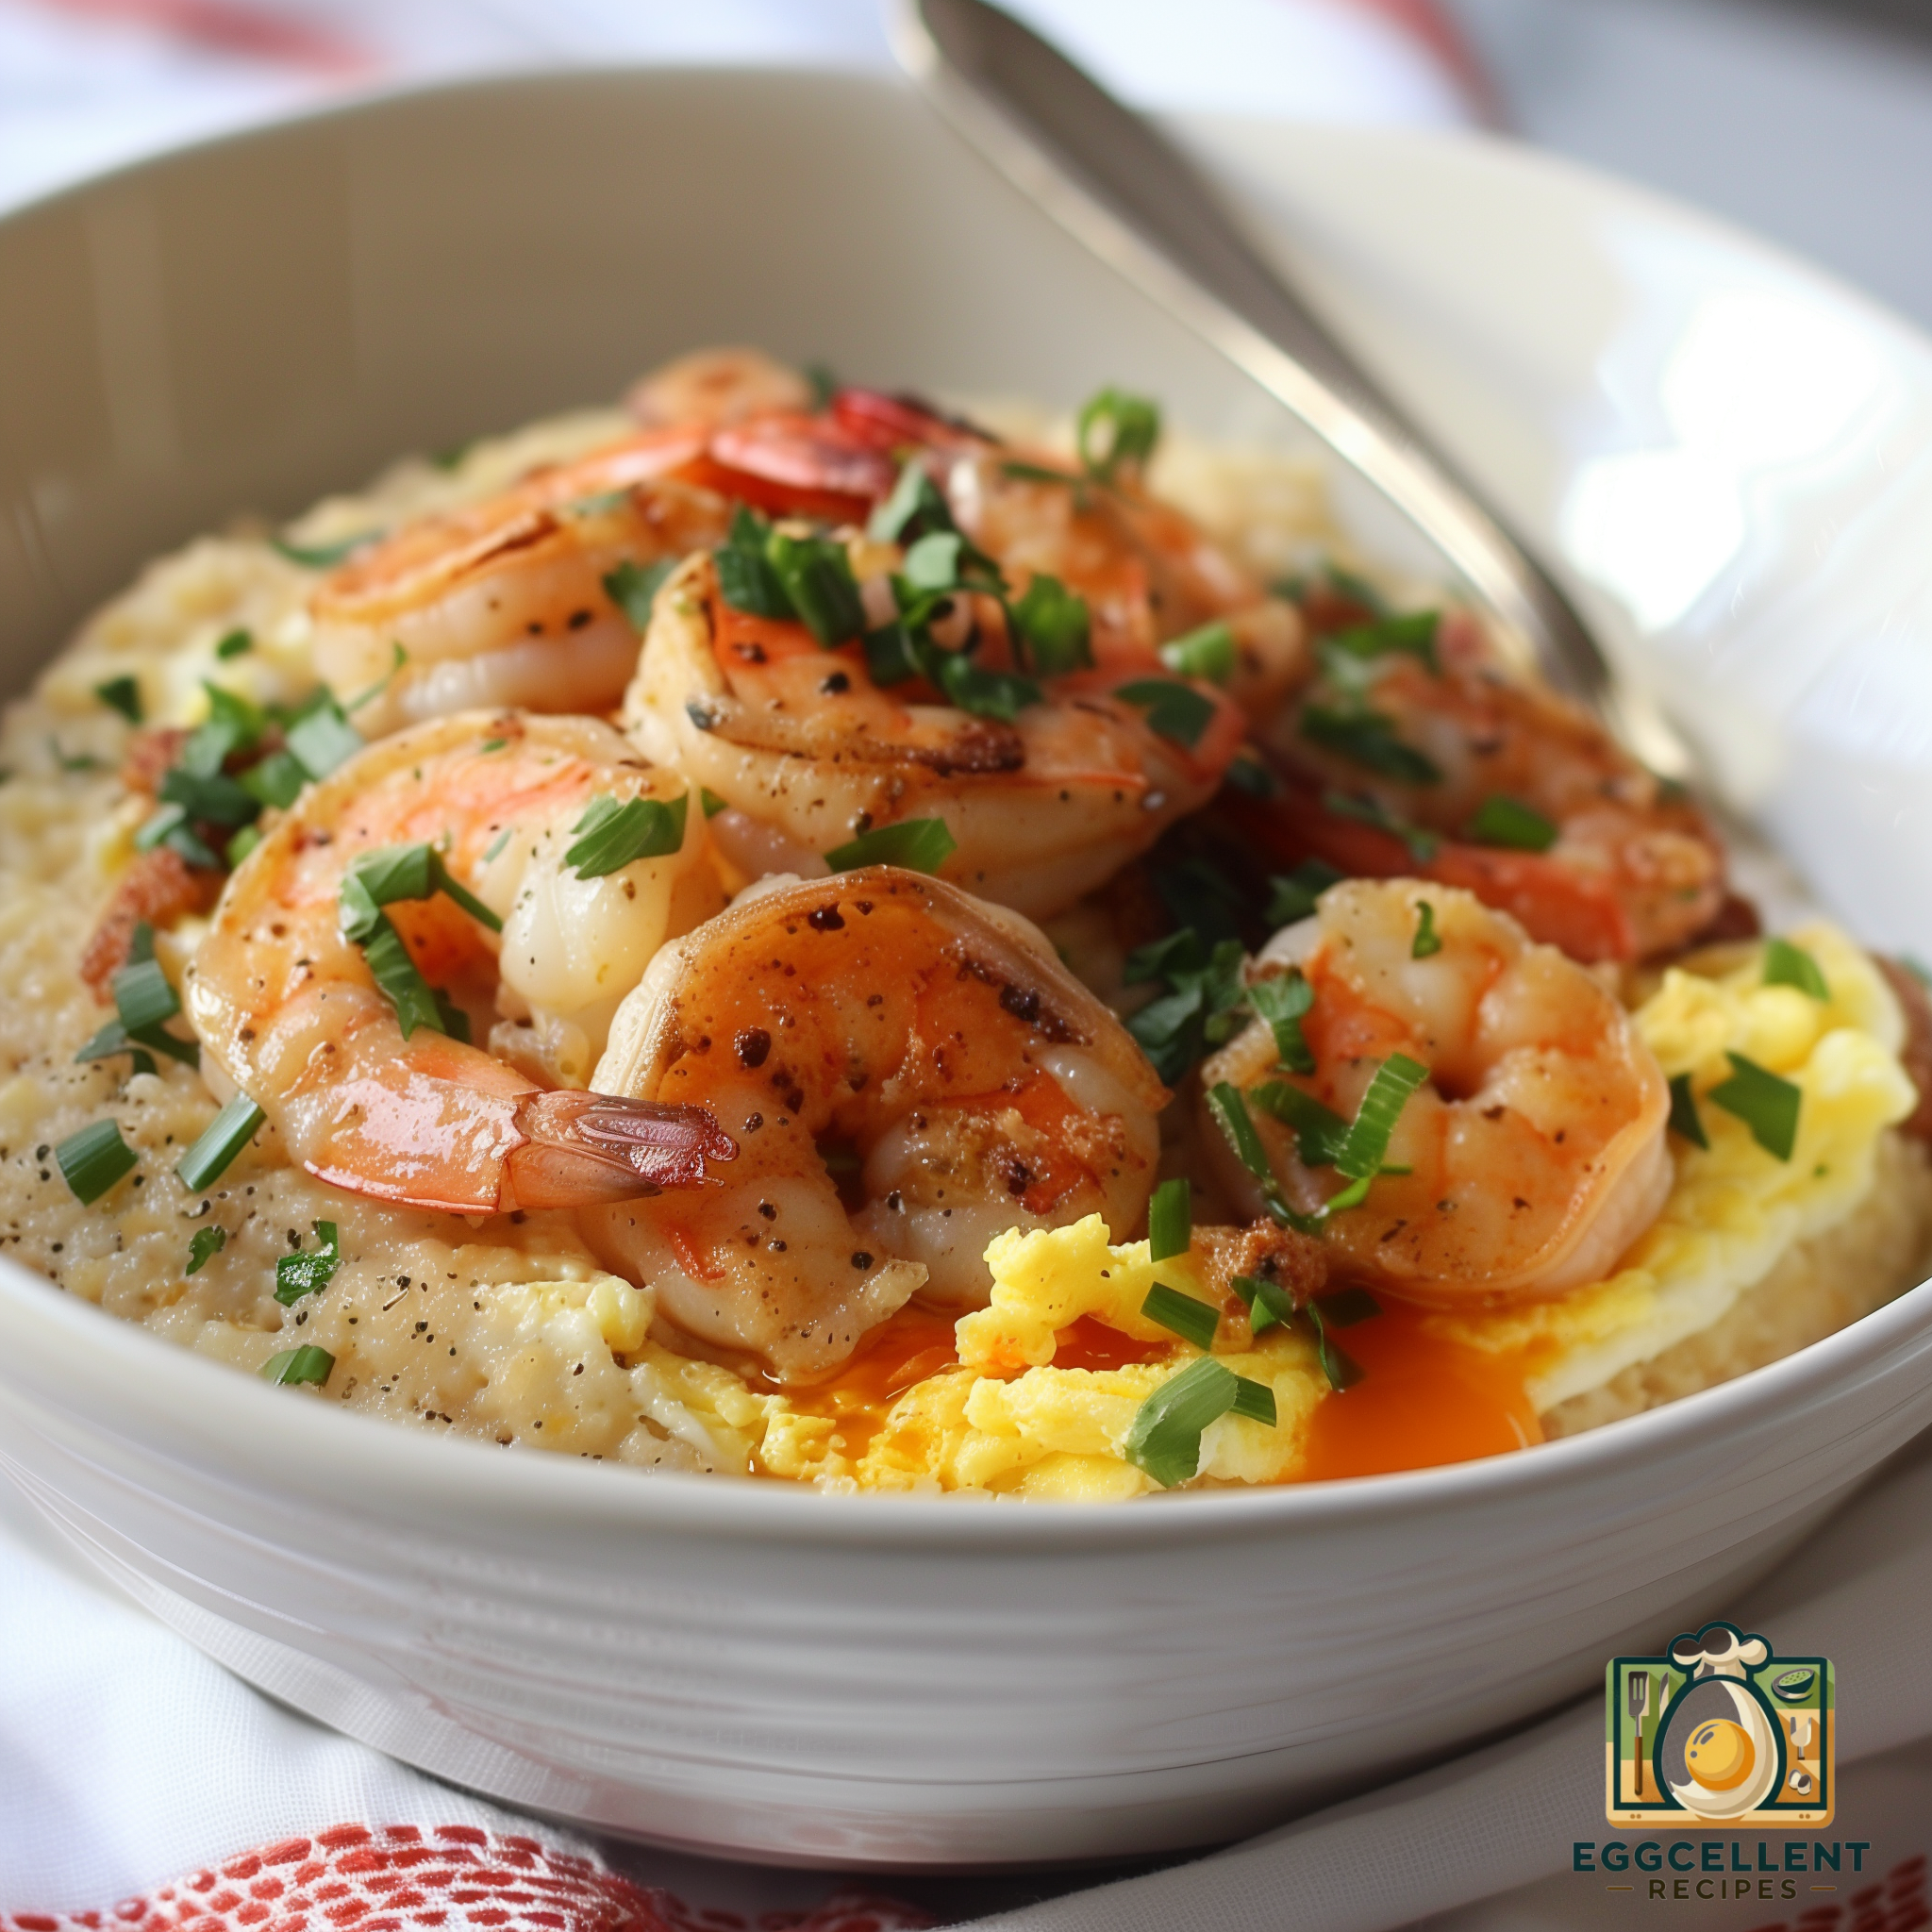 Southern-Style Grits and Eggs with Shrimp Recipe